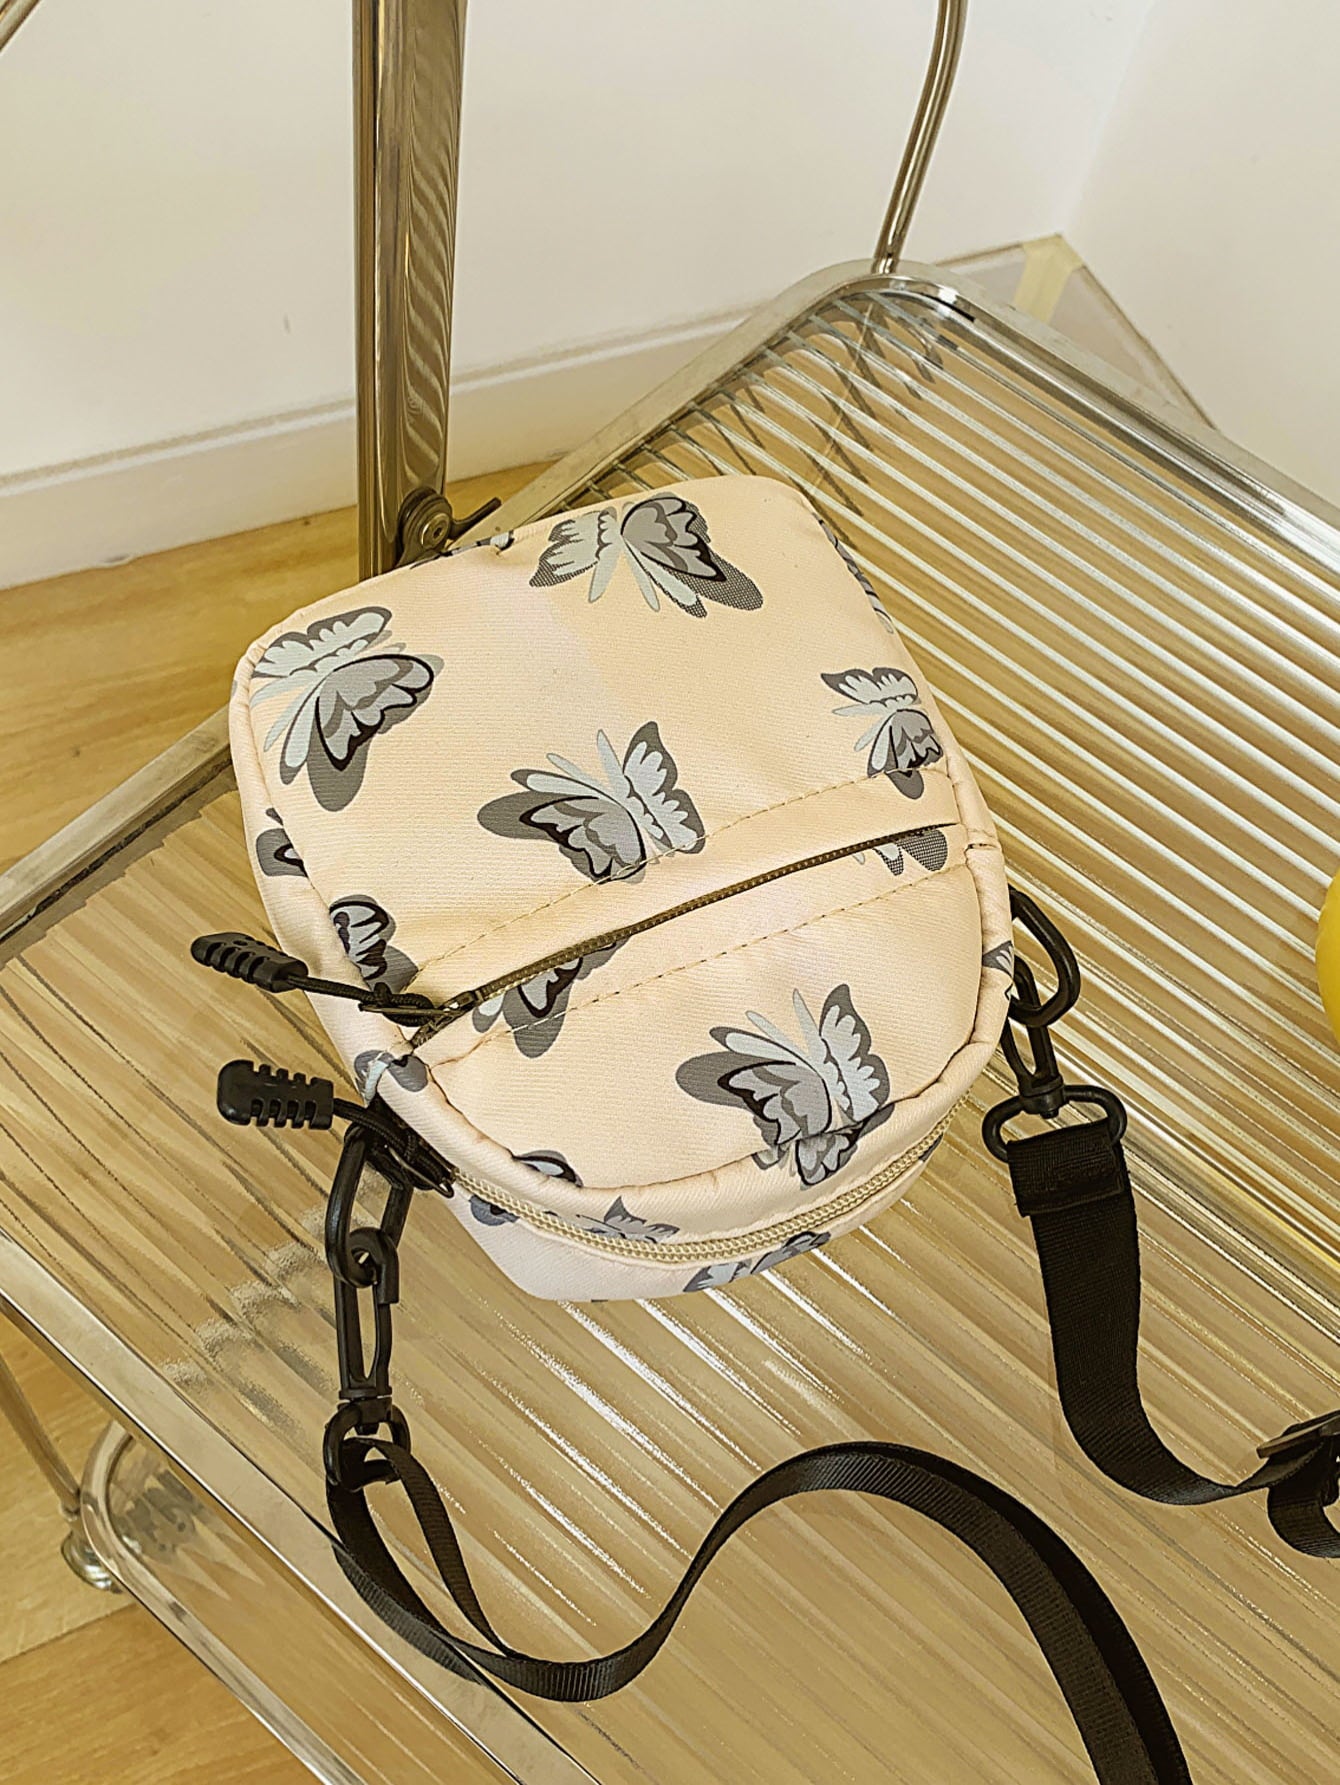 butterfly print polyester shoulder handbag, yellow with gray butterflies, on glass and metal slatted cart